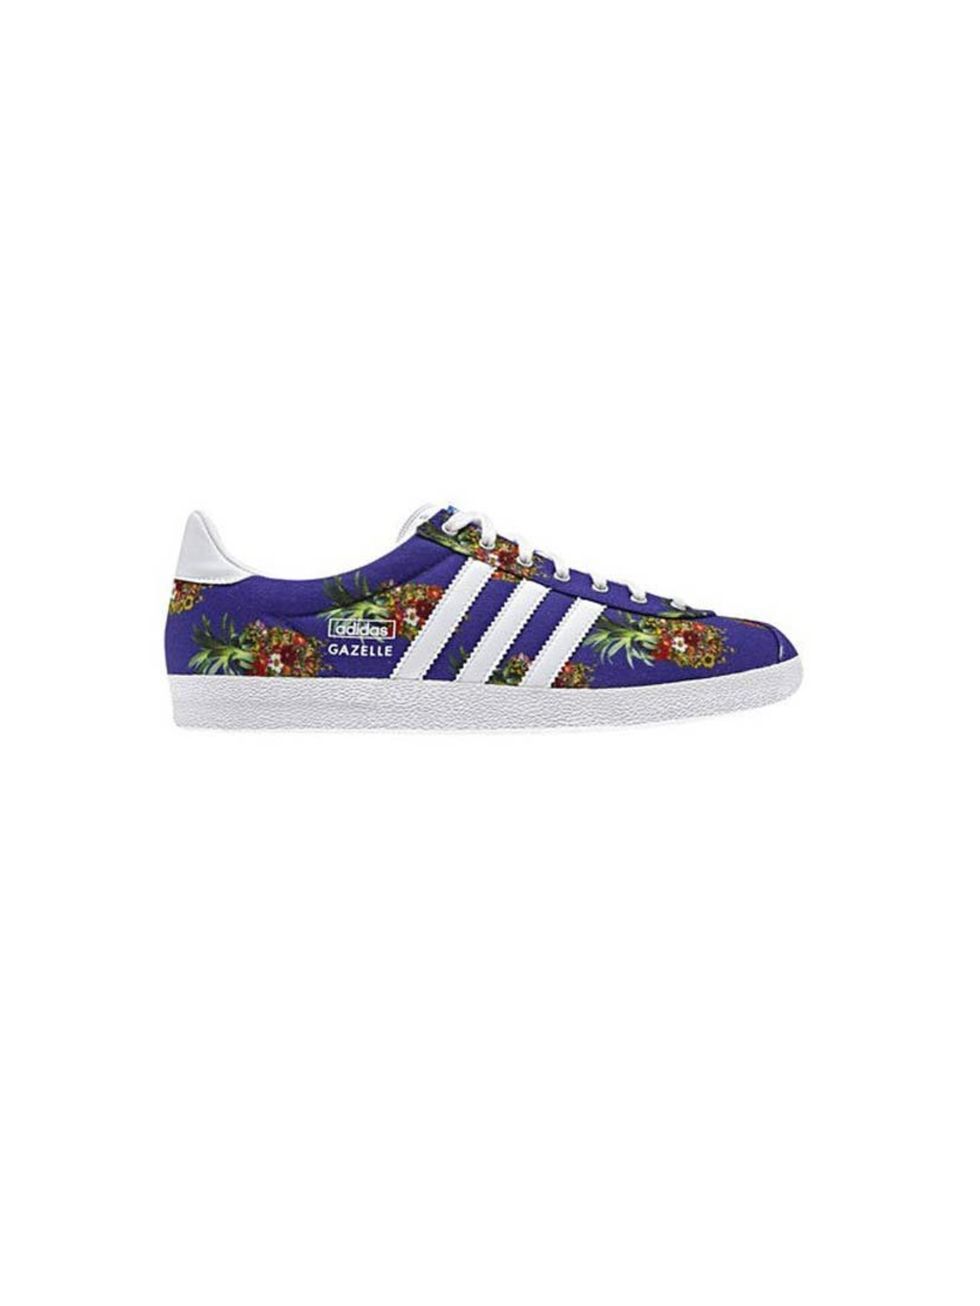 <p>No self-respecting trainer aficionado would be without these colourful printed kicks. </p><p><a href="http://www.adidas.co.uk/gazelle-og-shoes/D67721_530.html">Adidas x Farm Company</a> trainers, £67</p>